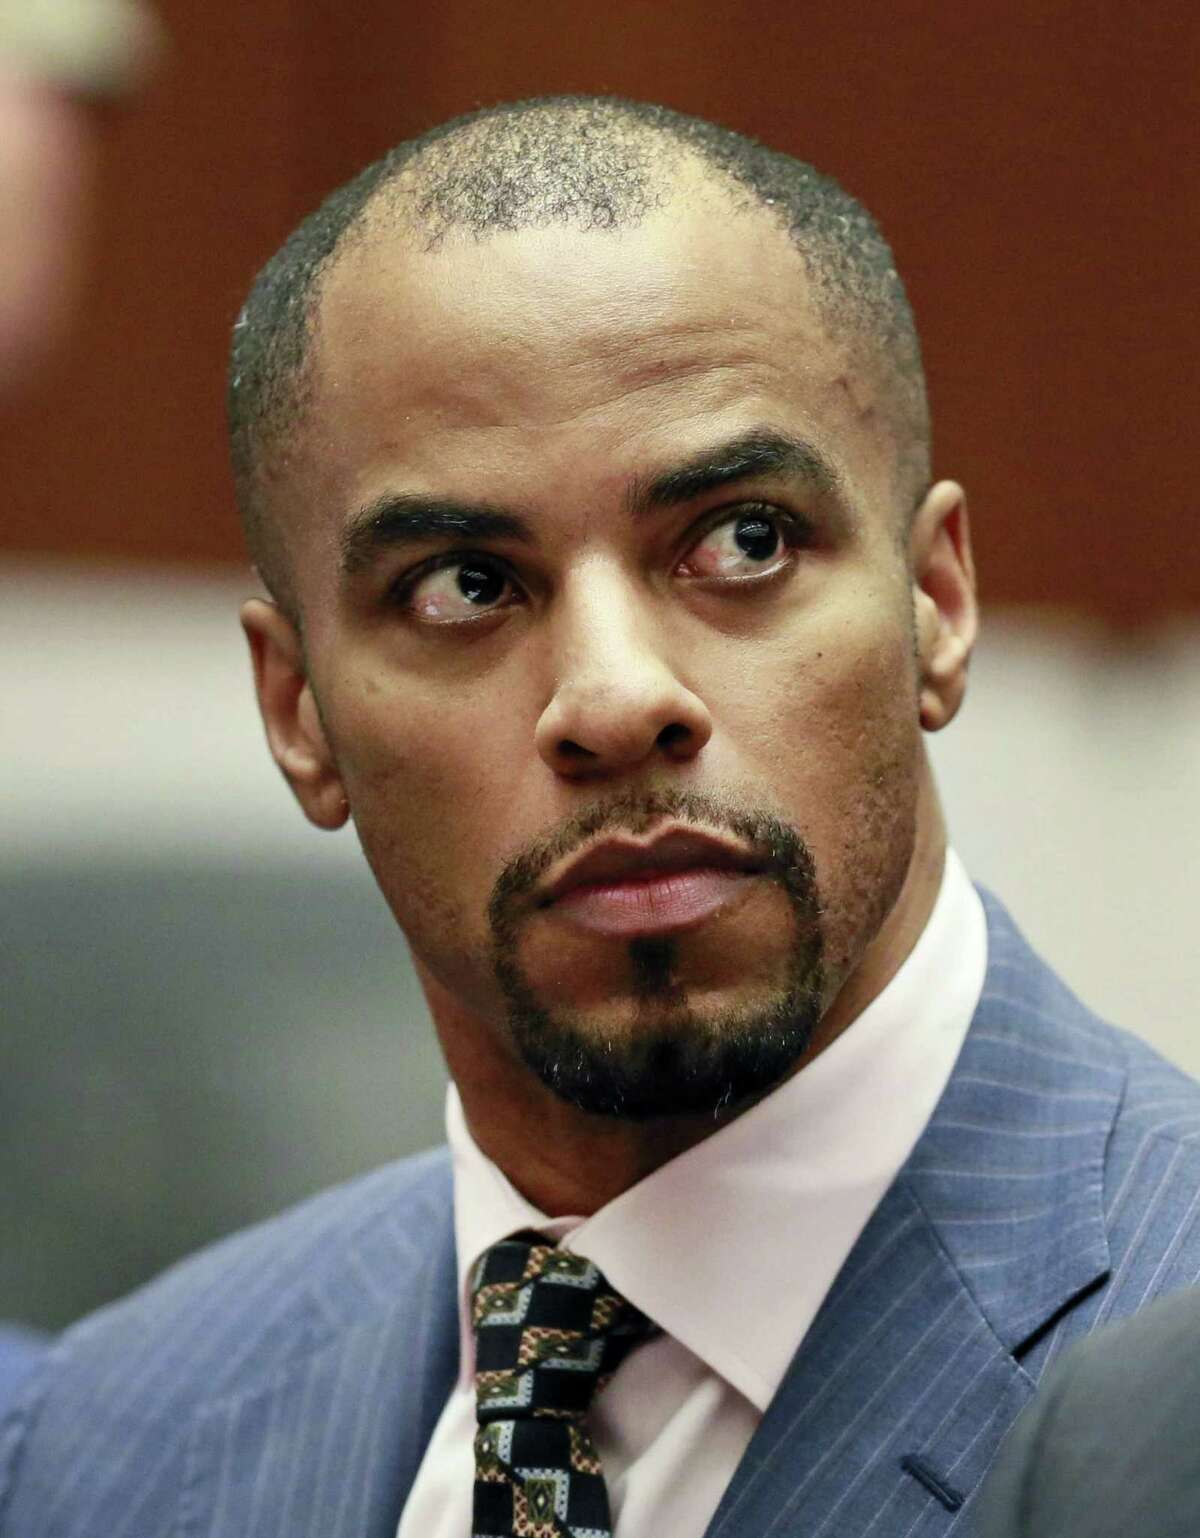 Former NFL player Darren Sharper pleaded guilty to rape Monday in Louisiana state court in New Orleans, completing a series of pleas in four states that will see him serve at least nine years in prison.